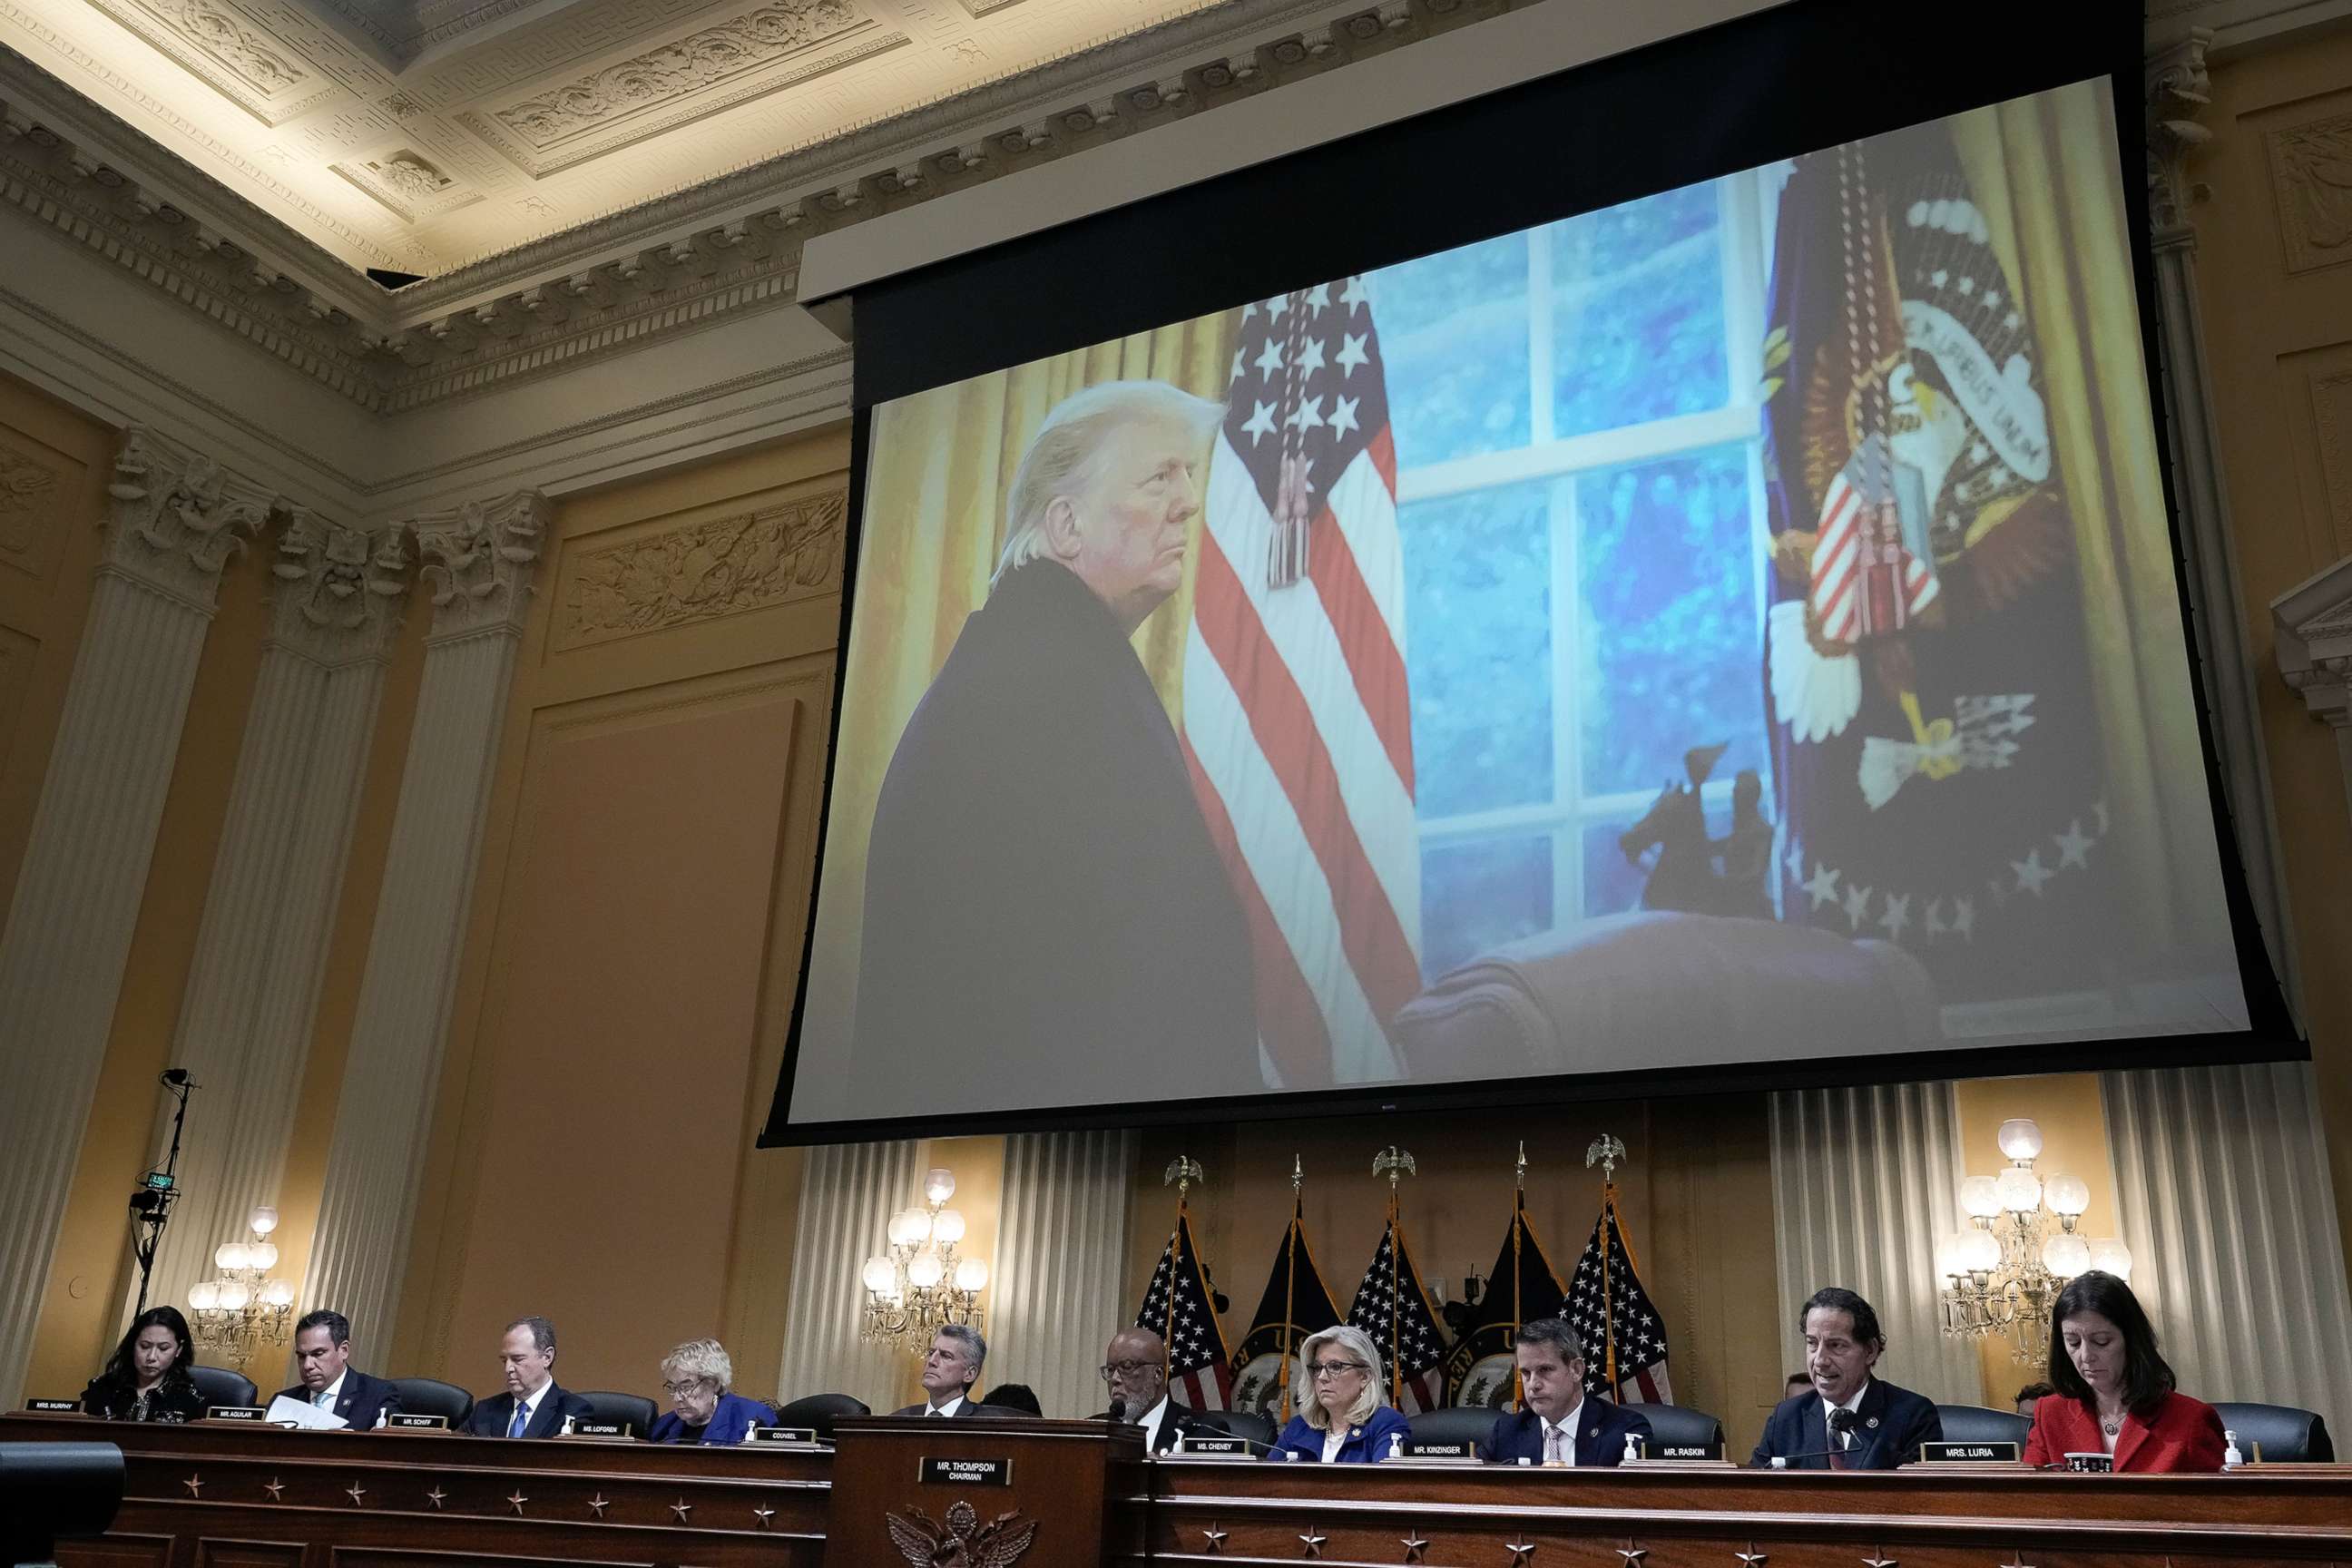 PHOTO: A photo of former President Donald Trump is shown during a hearing by the House Select Committee to Investigate the January 6th Attack on the U.S. Capitol in the Cannon House Office Building in Washington, Oct. 13, 2022.